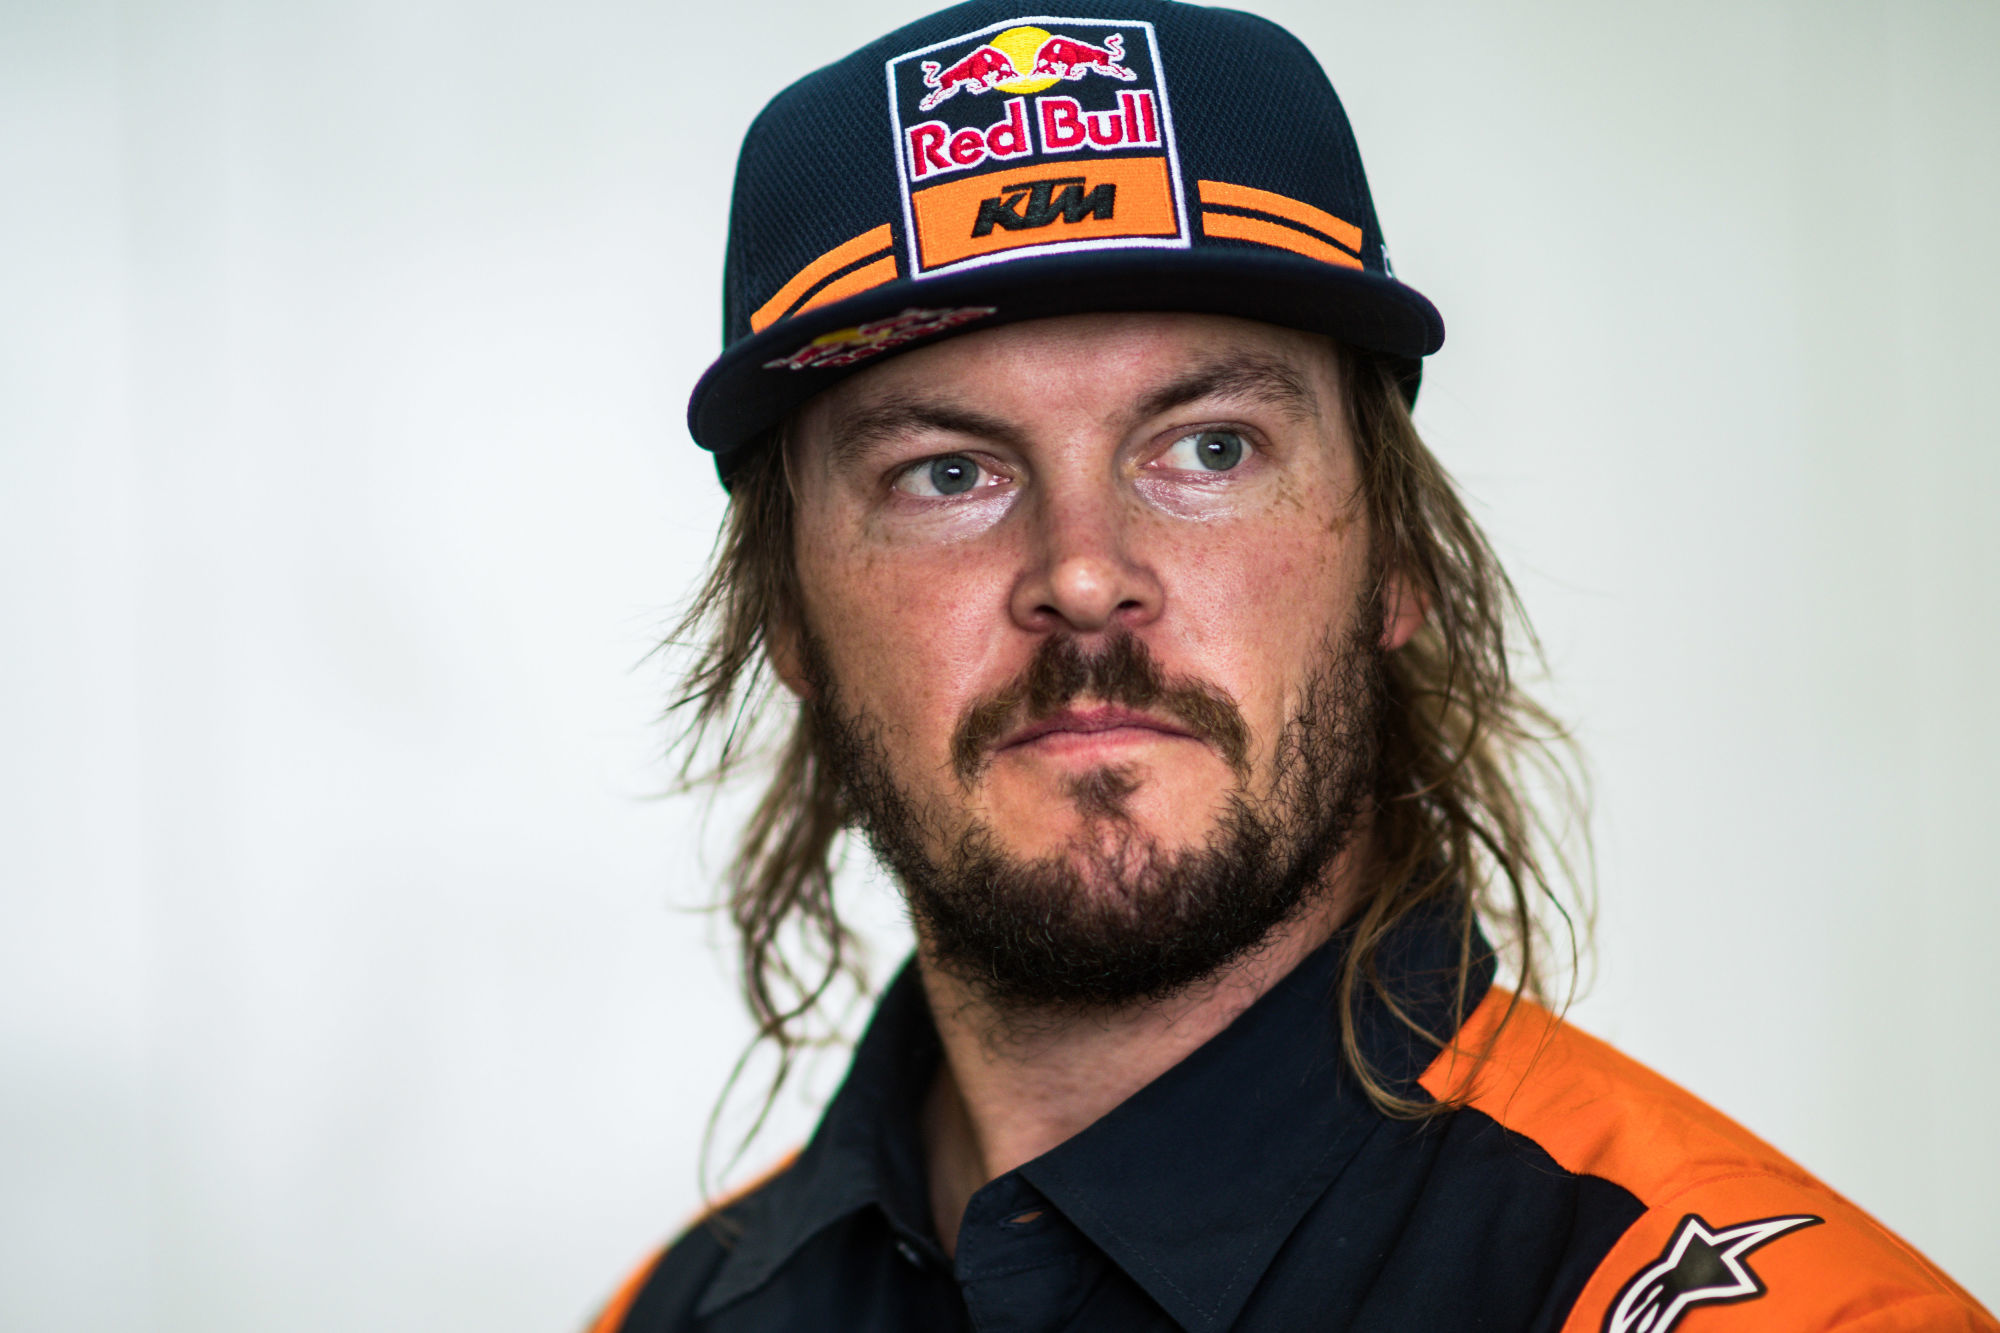 Toby Price (AUS) of Red Bull KTM Factory Team is seen during the techinical verifications of Rally Dakar 2019 in Lima, Peru on January 06, 2019.
Photo: Marcelo Maragni / Red Bull Content Pool / Icon Sport